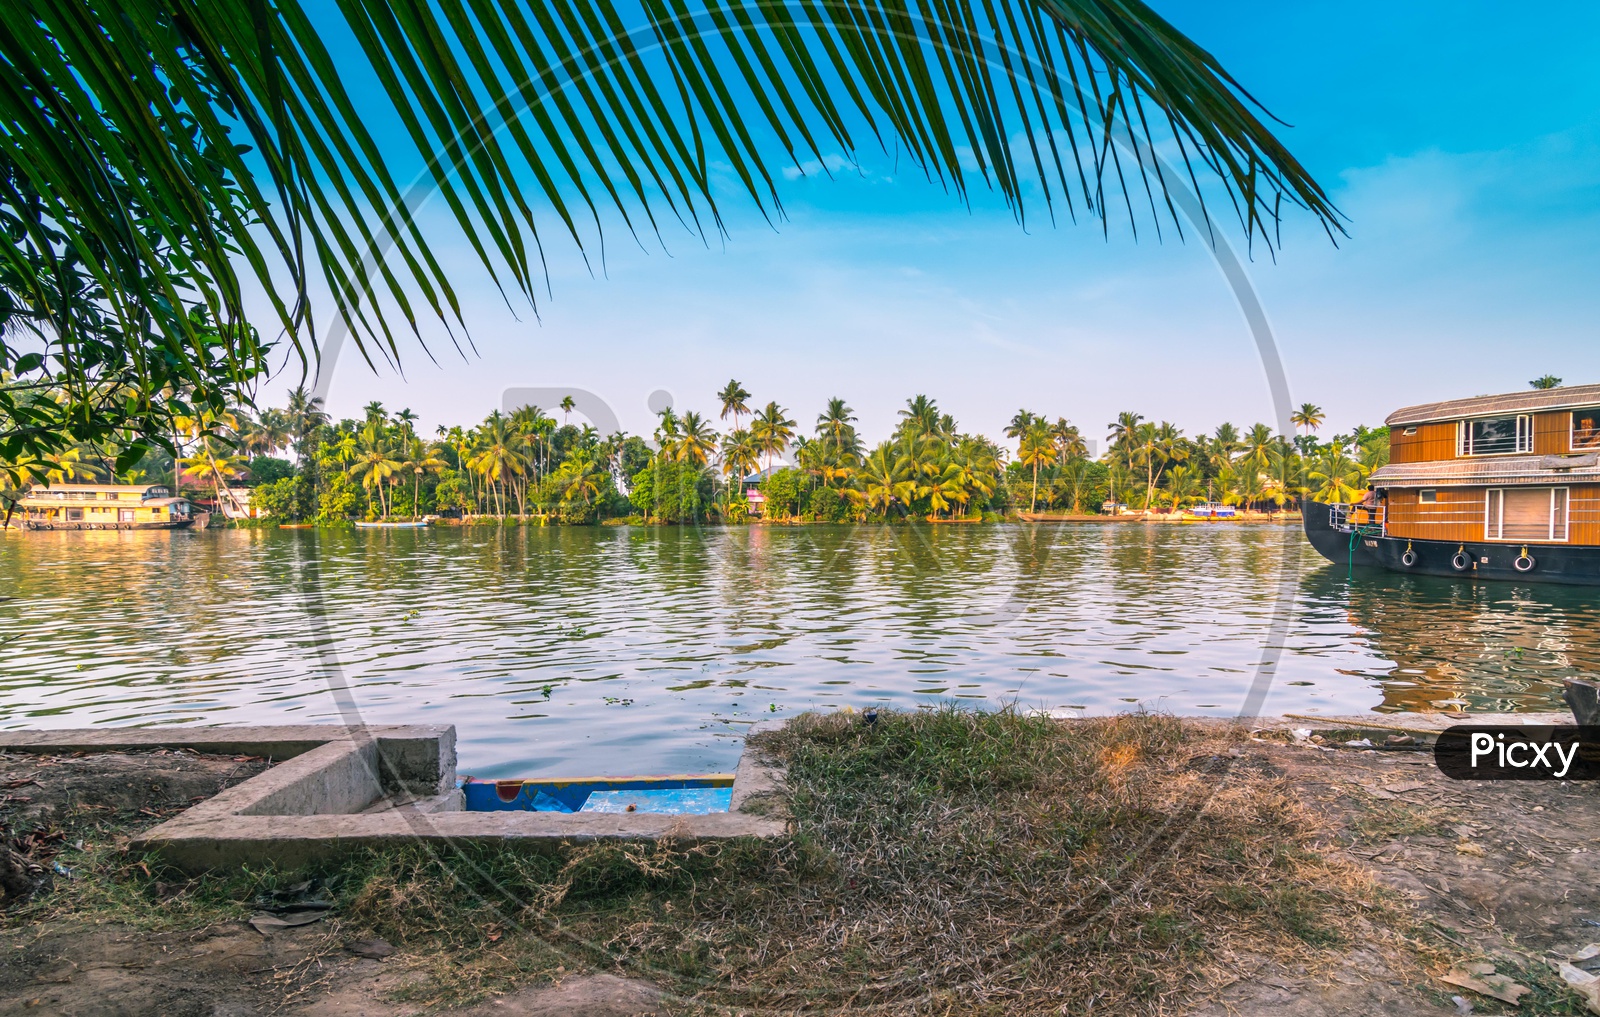 View of coconut trees and houseboats on the backwaters